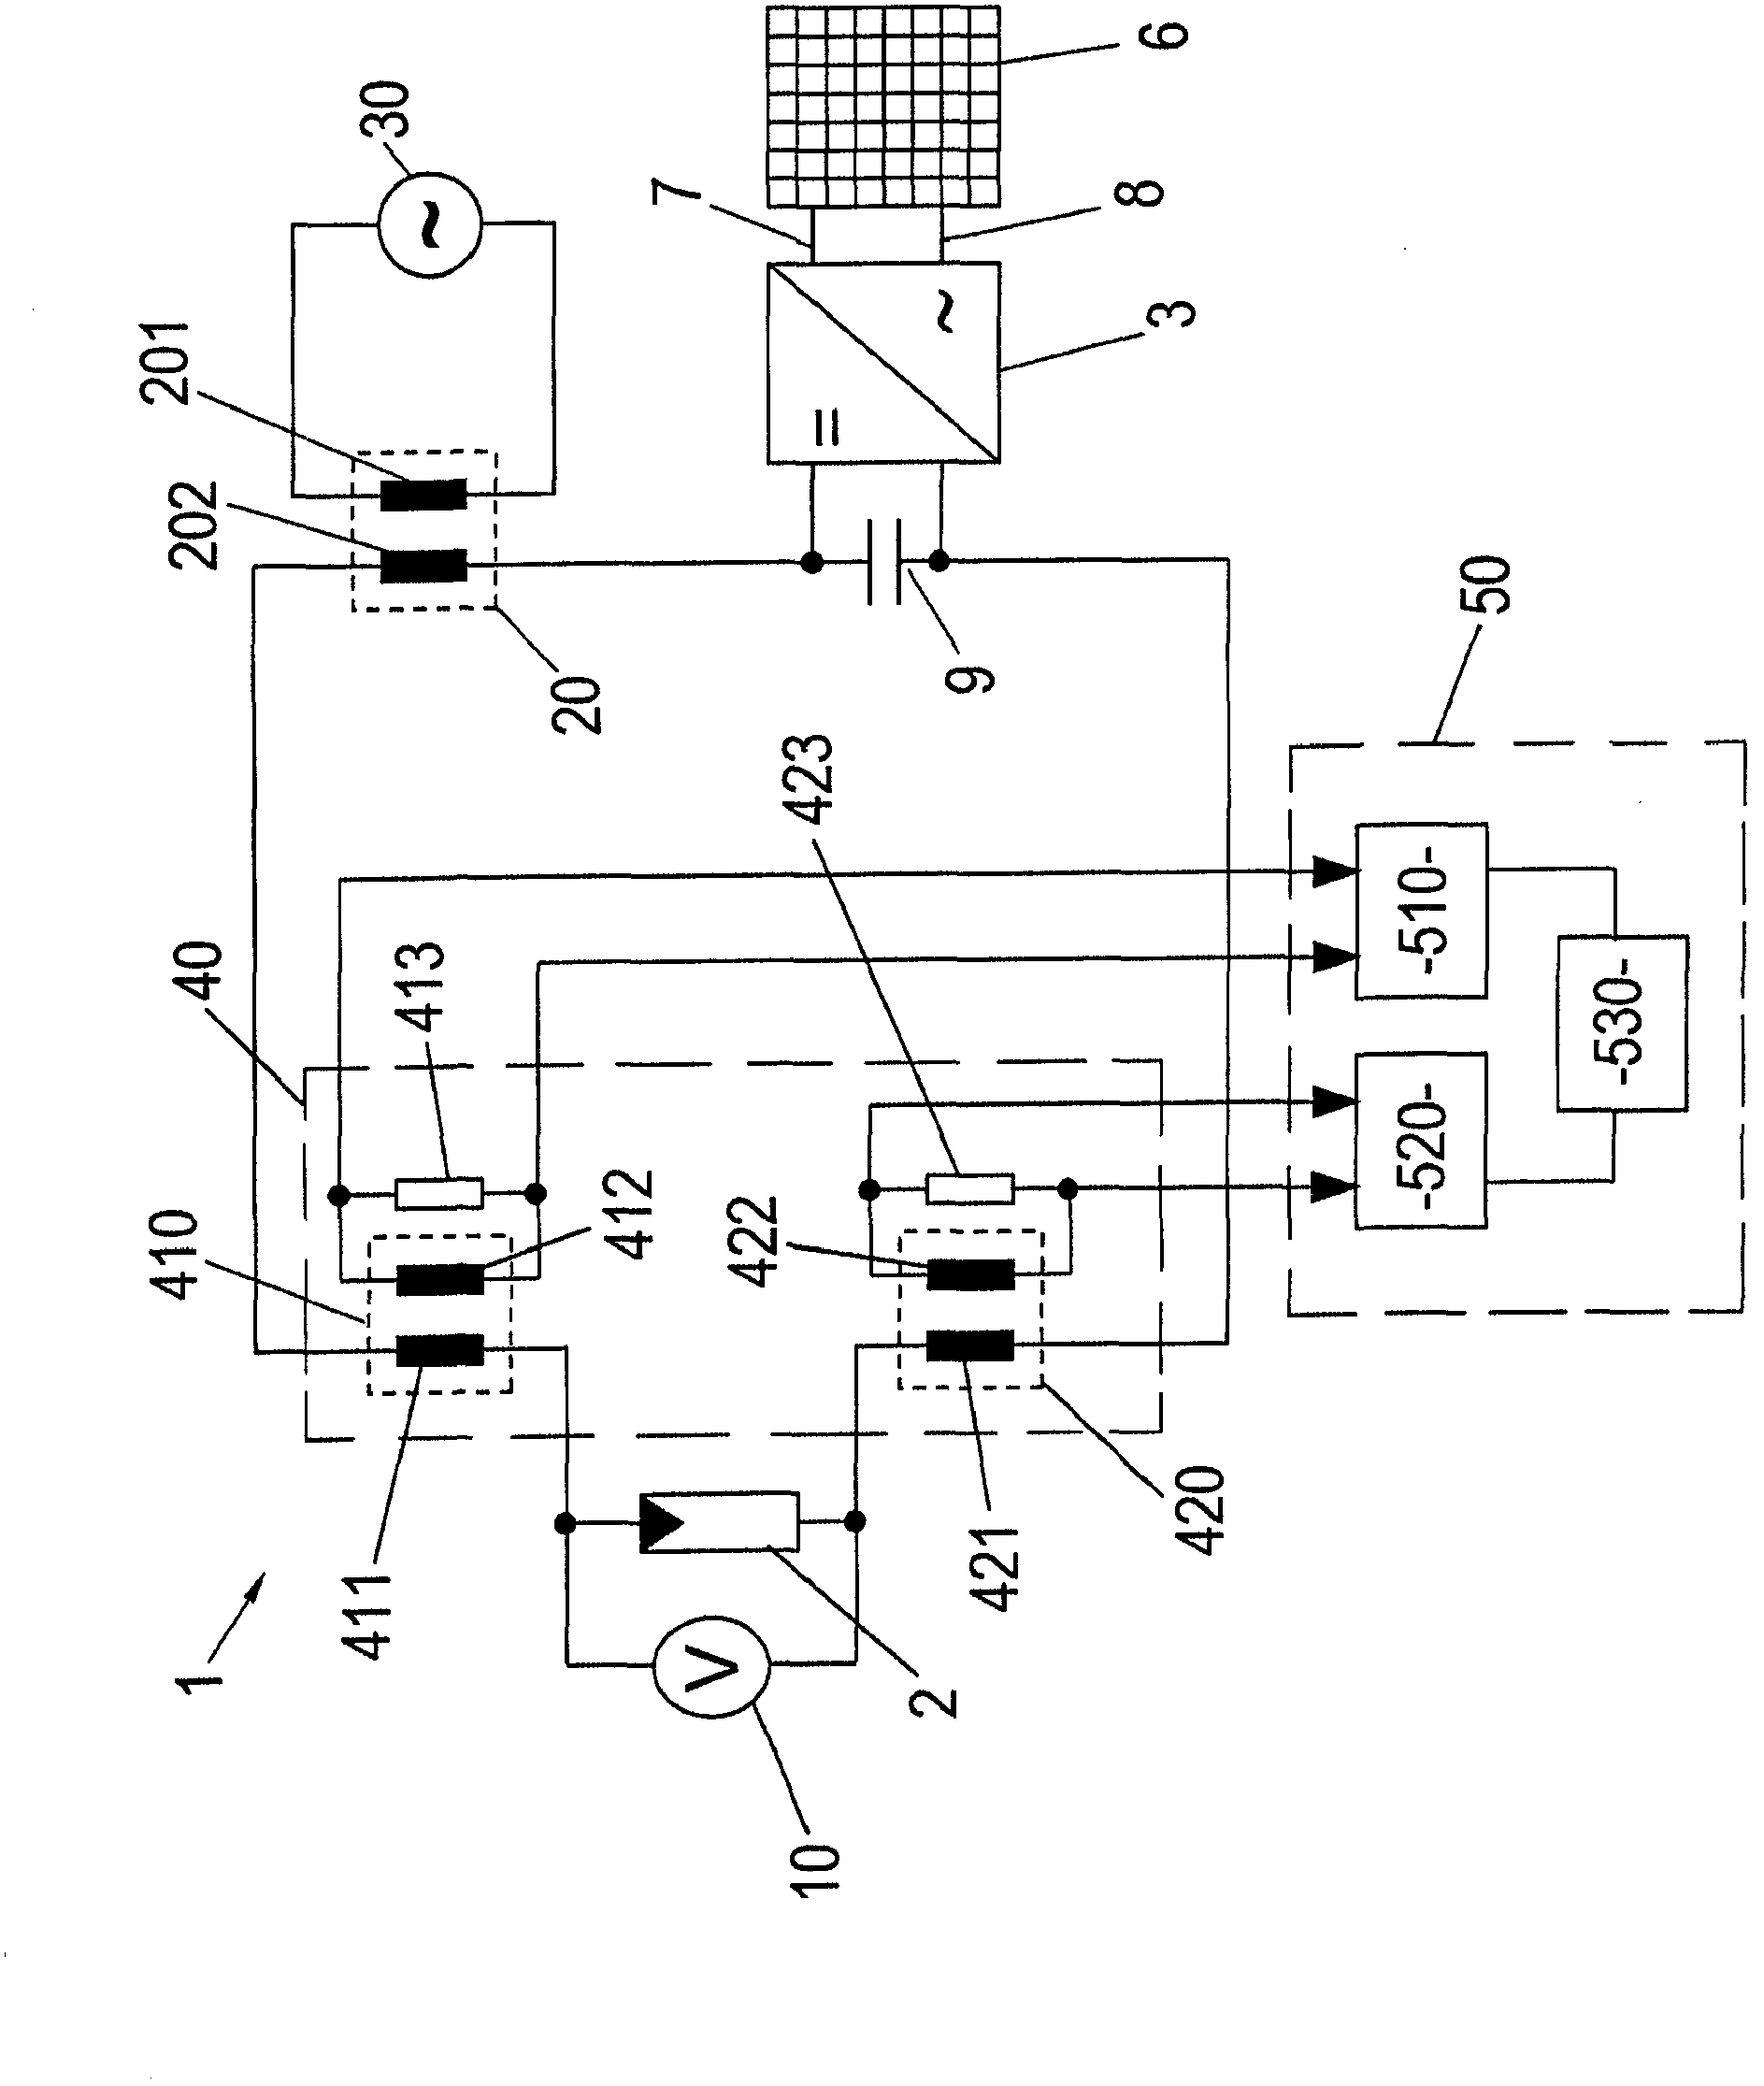 Apparatus and method for monitoring a photovoltaic system